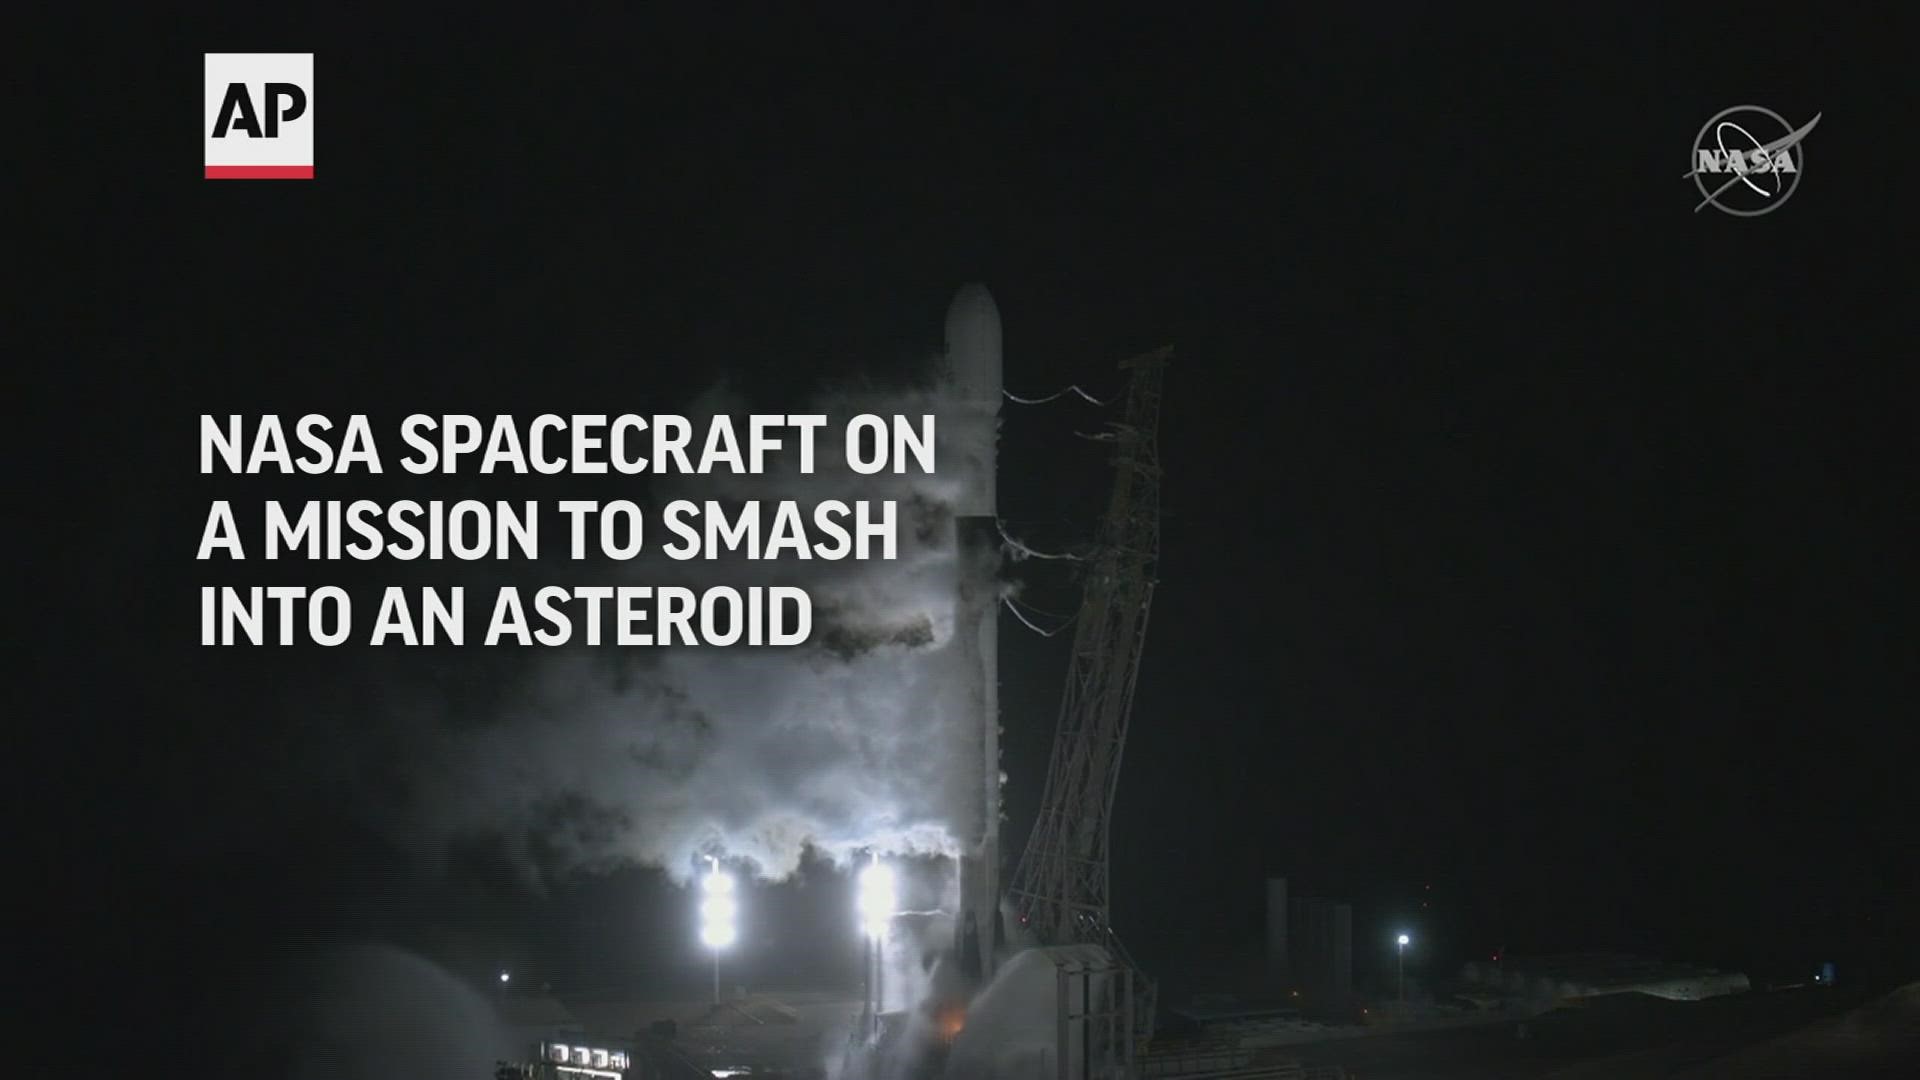 NASA launched a spacecraft overnight on a mission to smash into an asteroid.